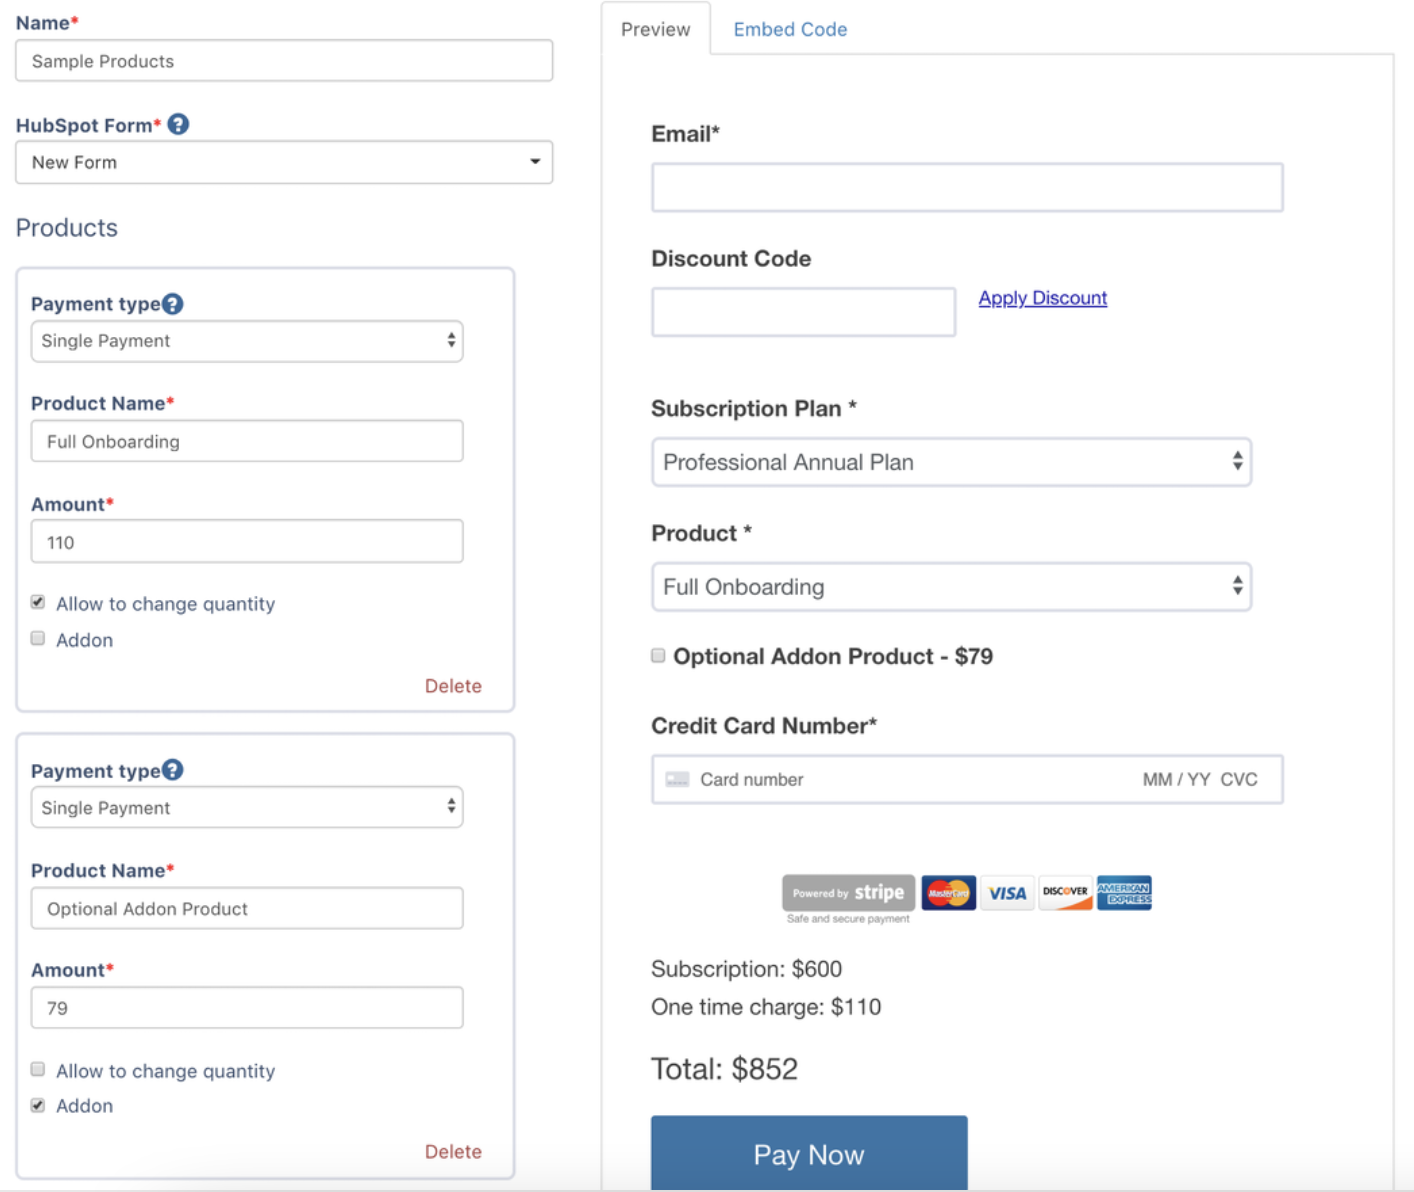 How to Start an Online Store for Free: Using Depositfix Integration with Hubspot Payments